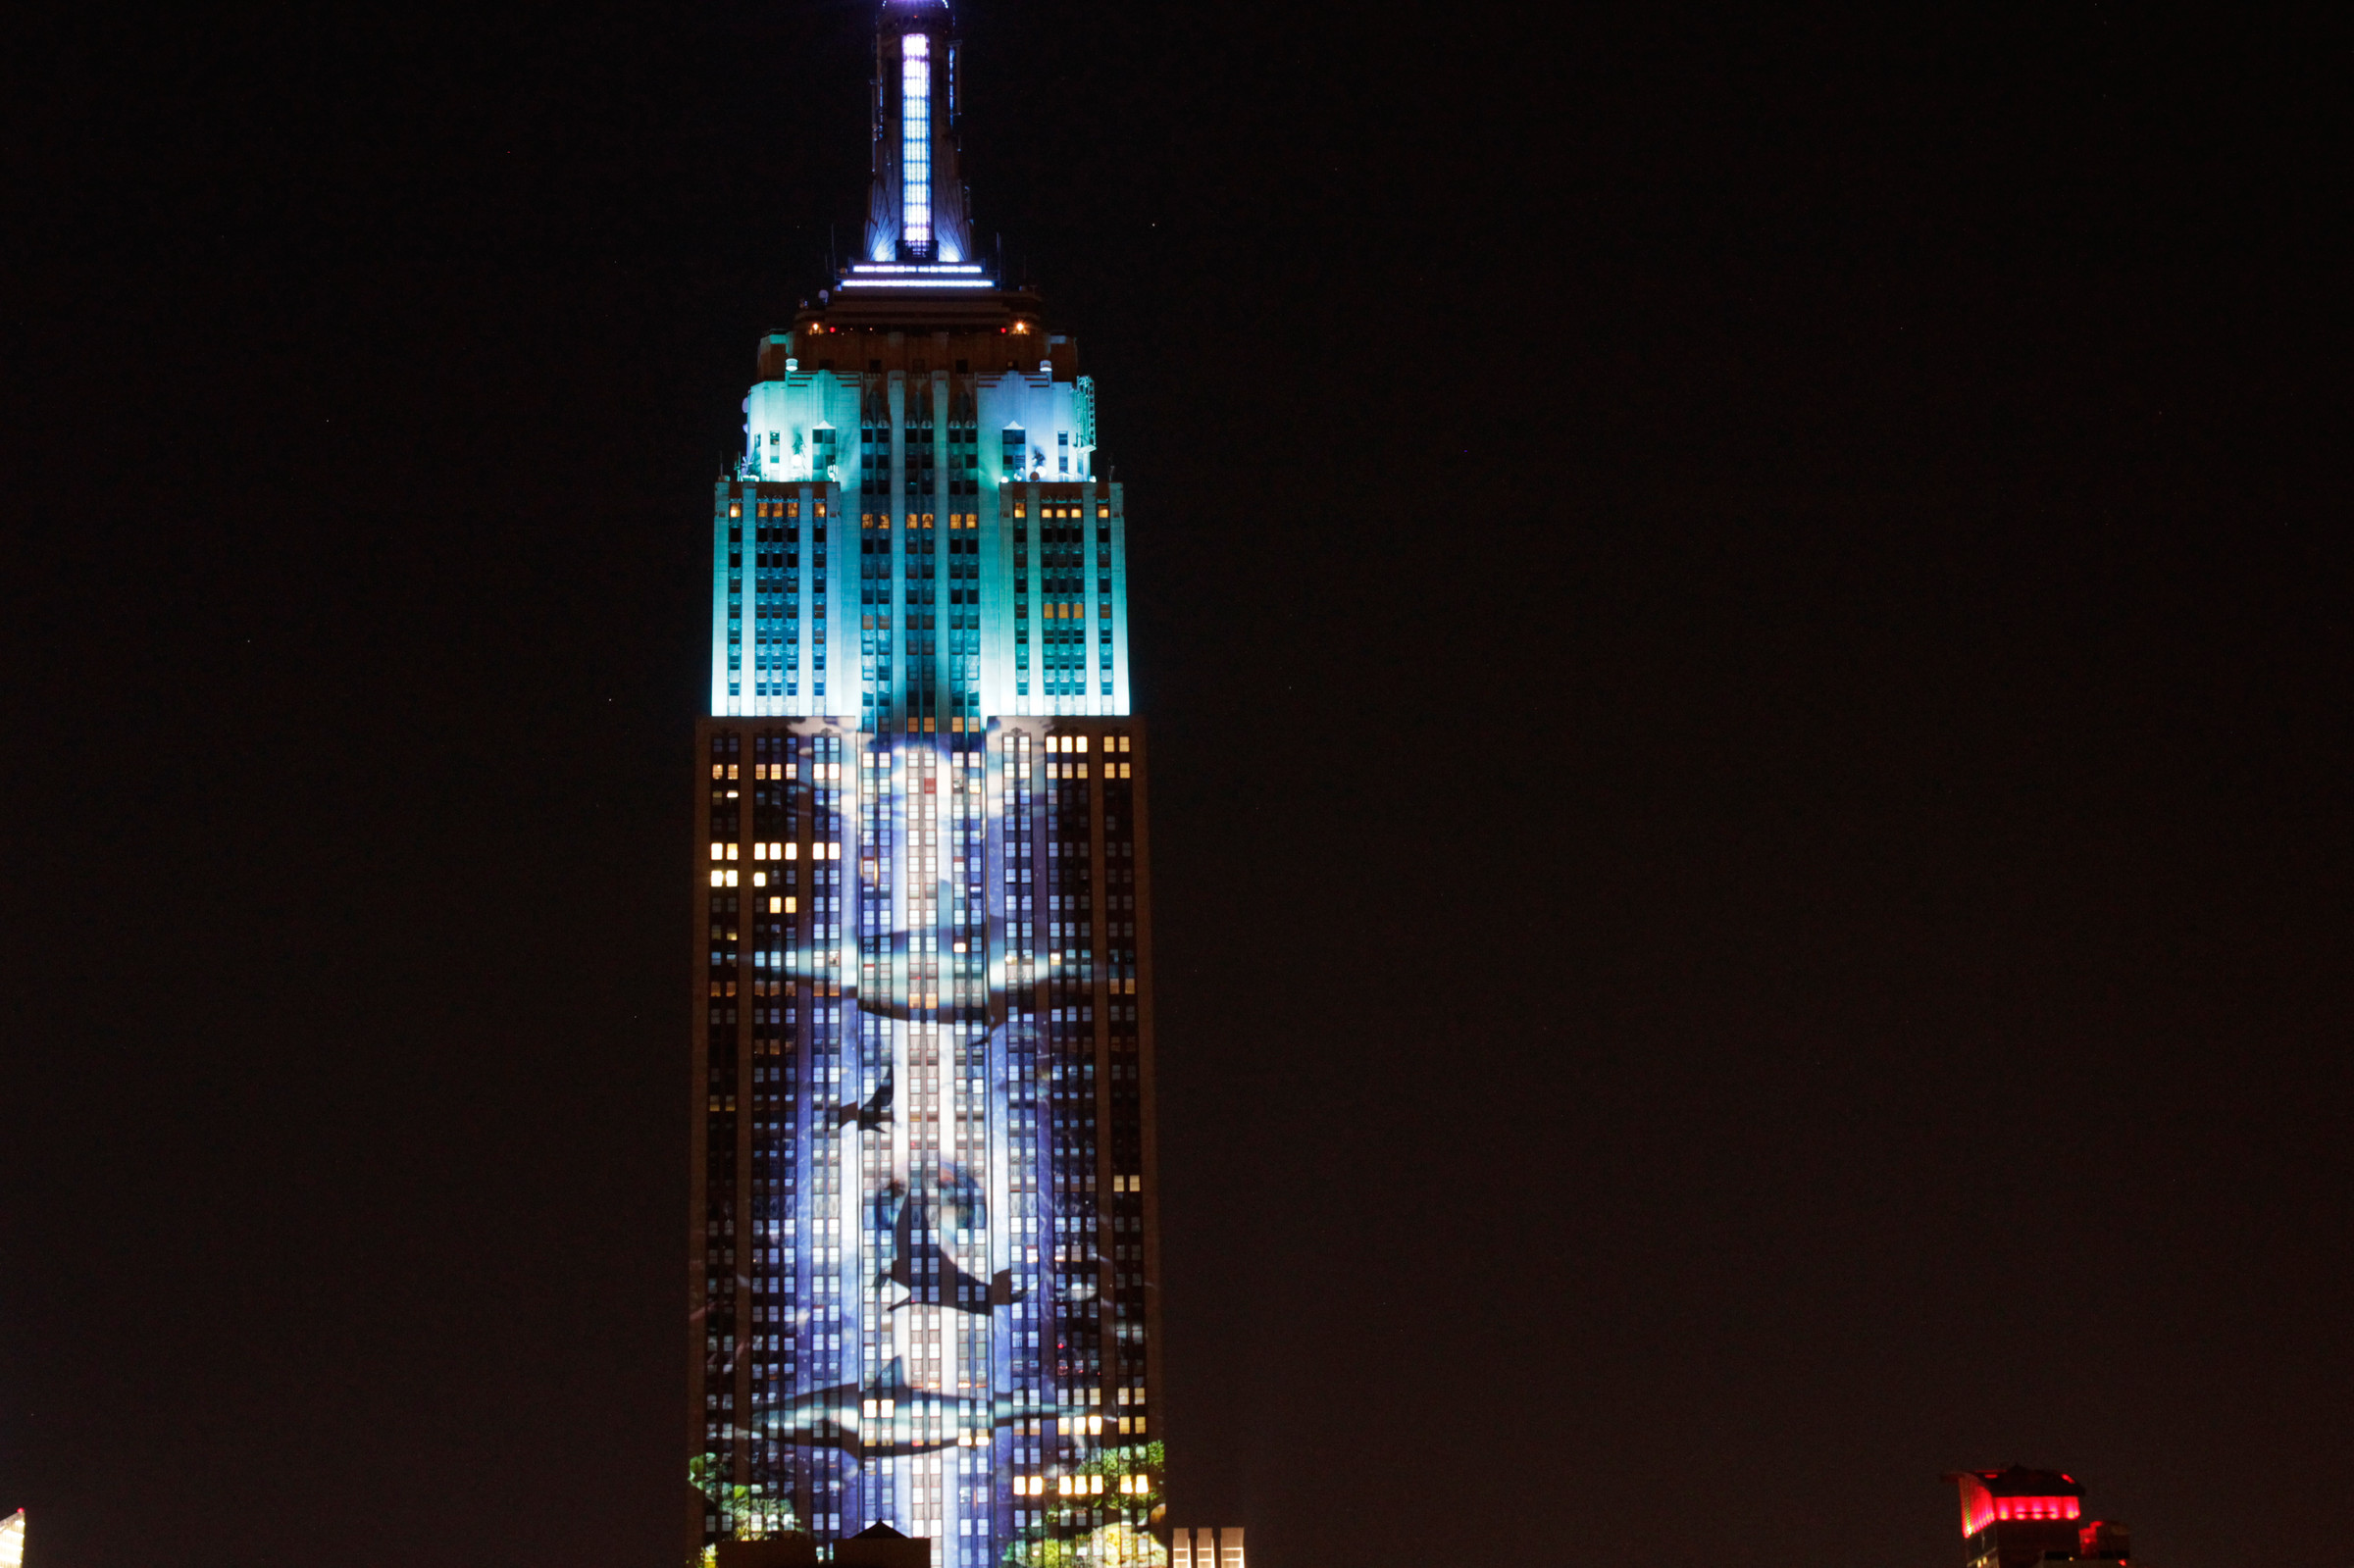 Watching endangered species illuminate the Empire State Building 